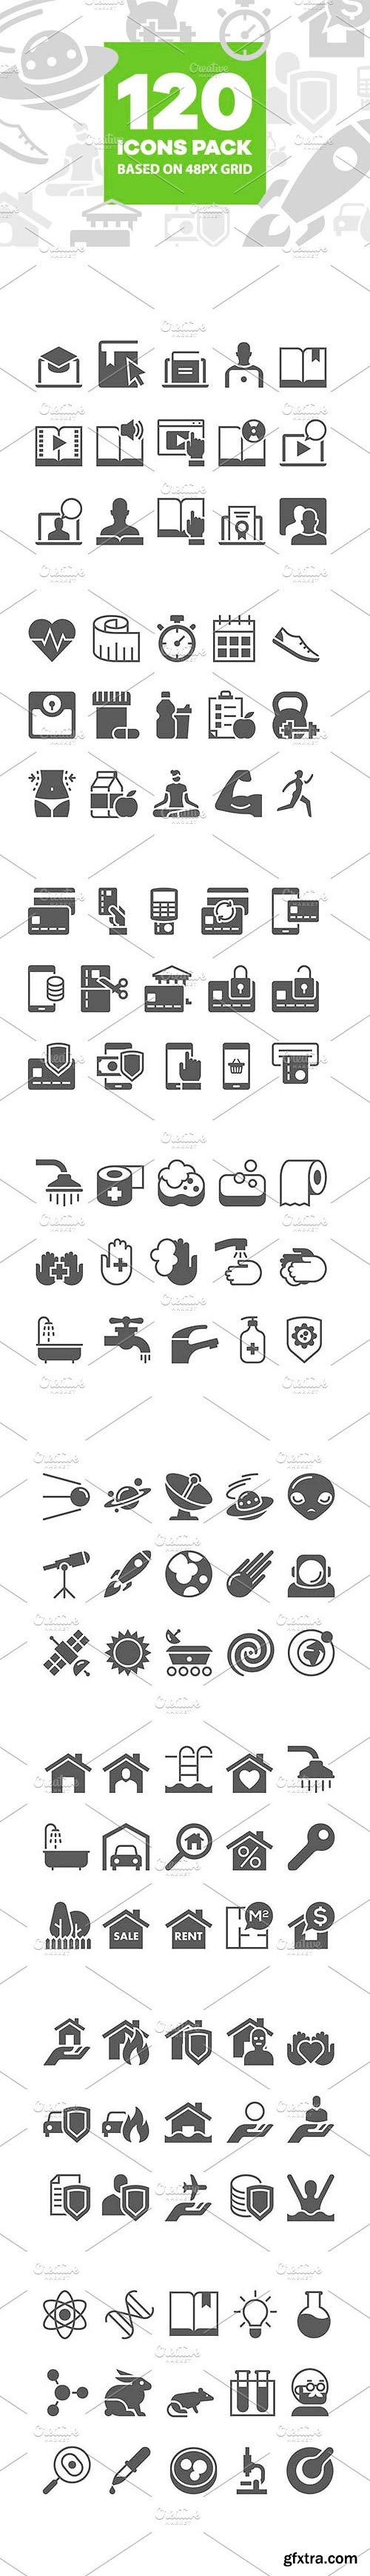 CM 1235215 - Vector Icons Pack